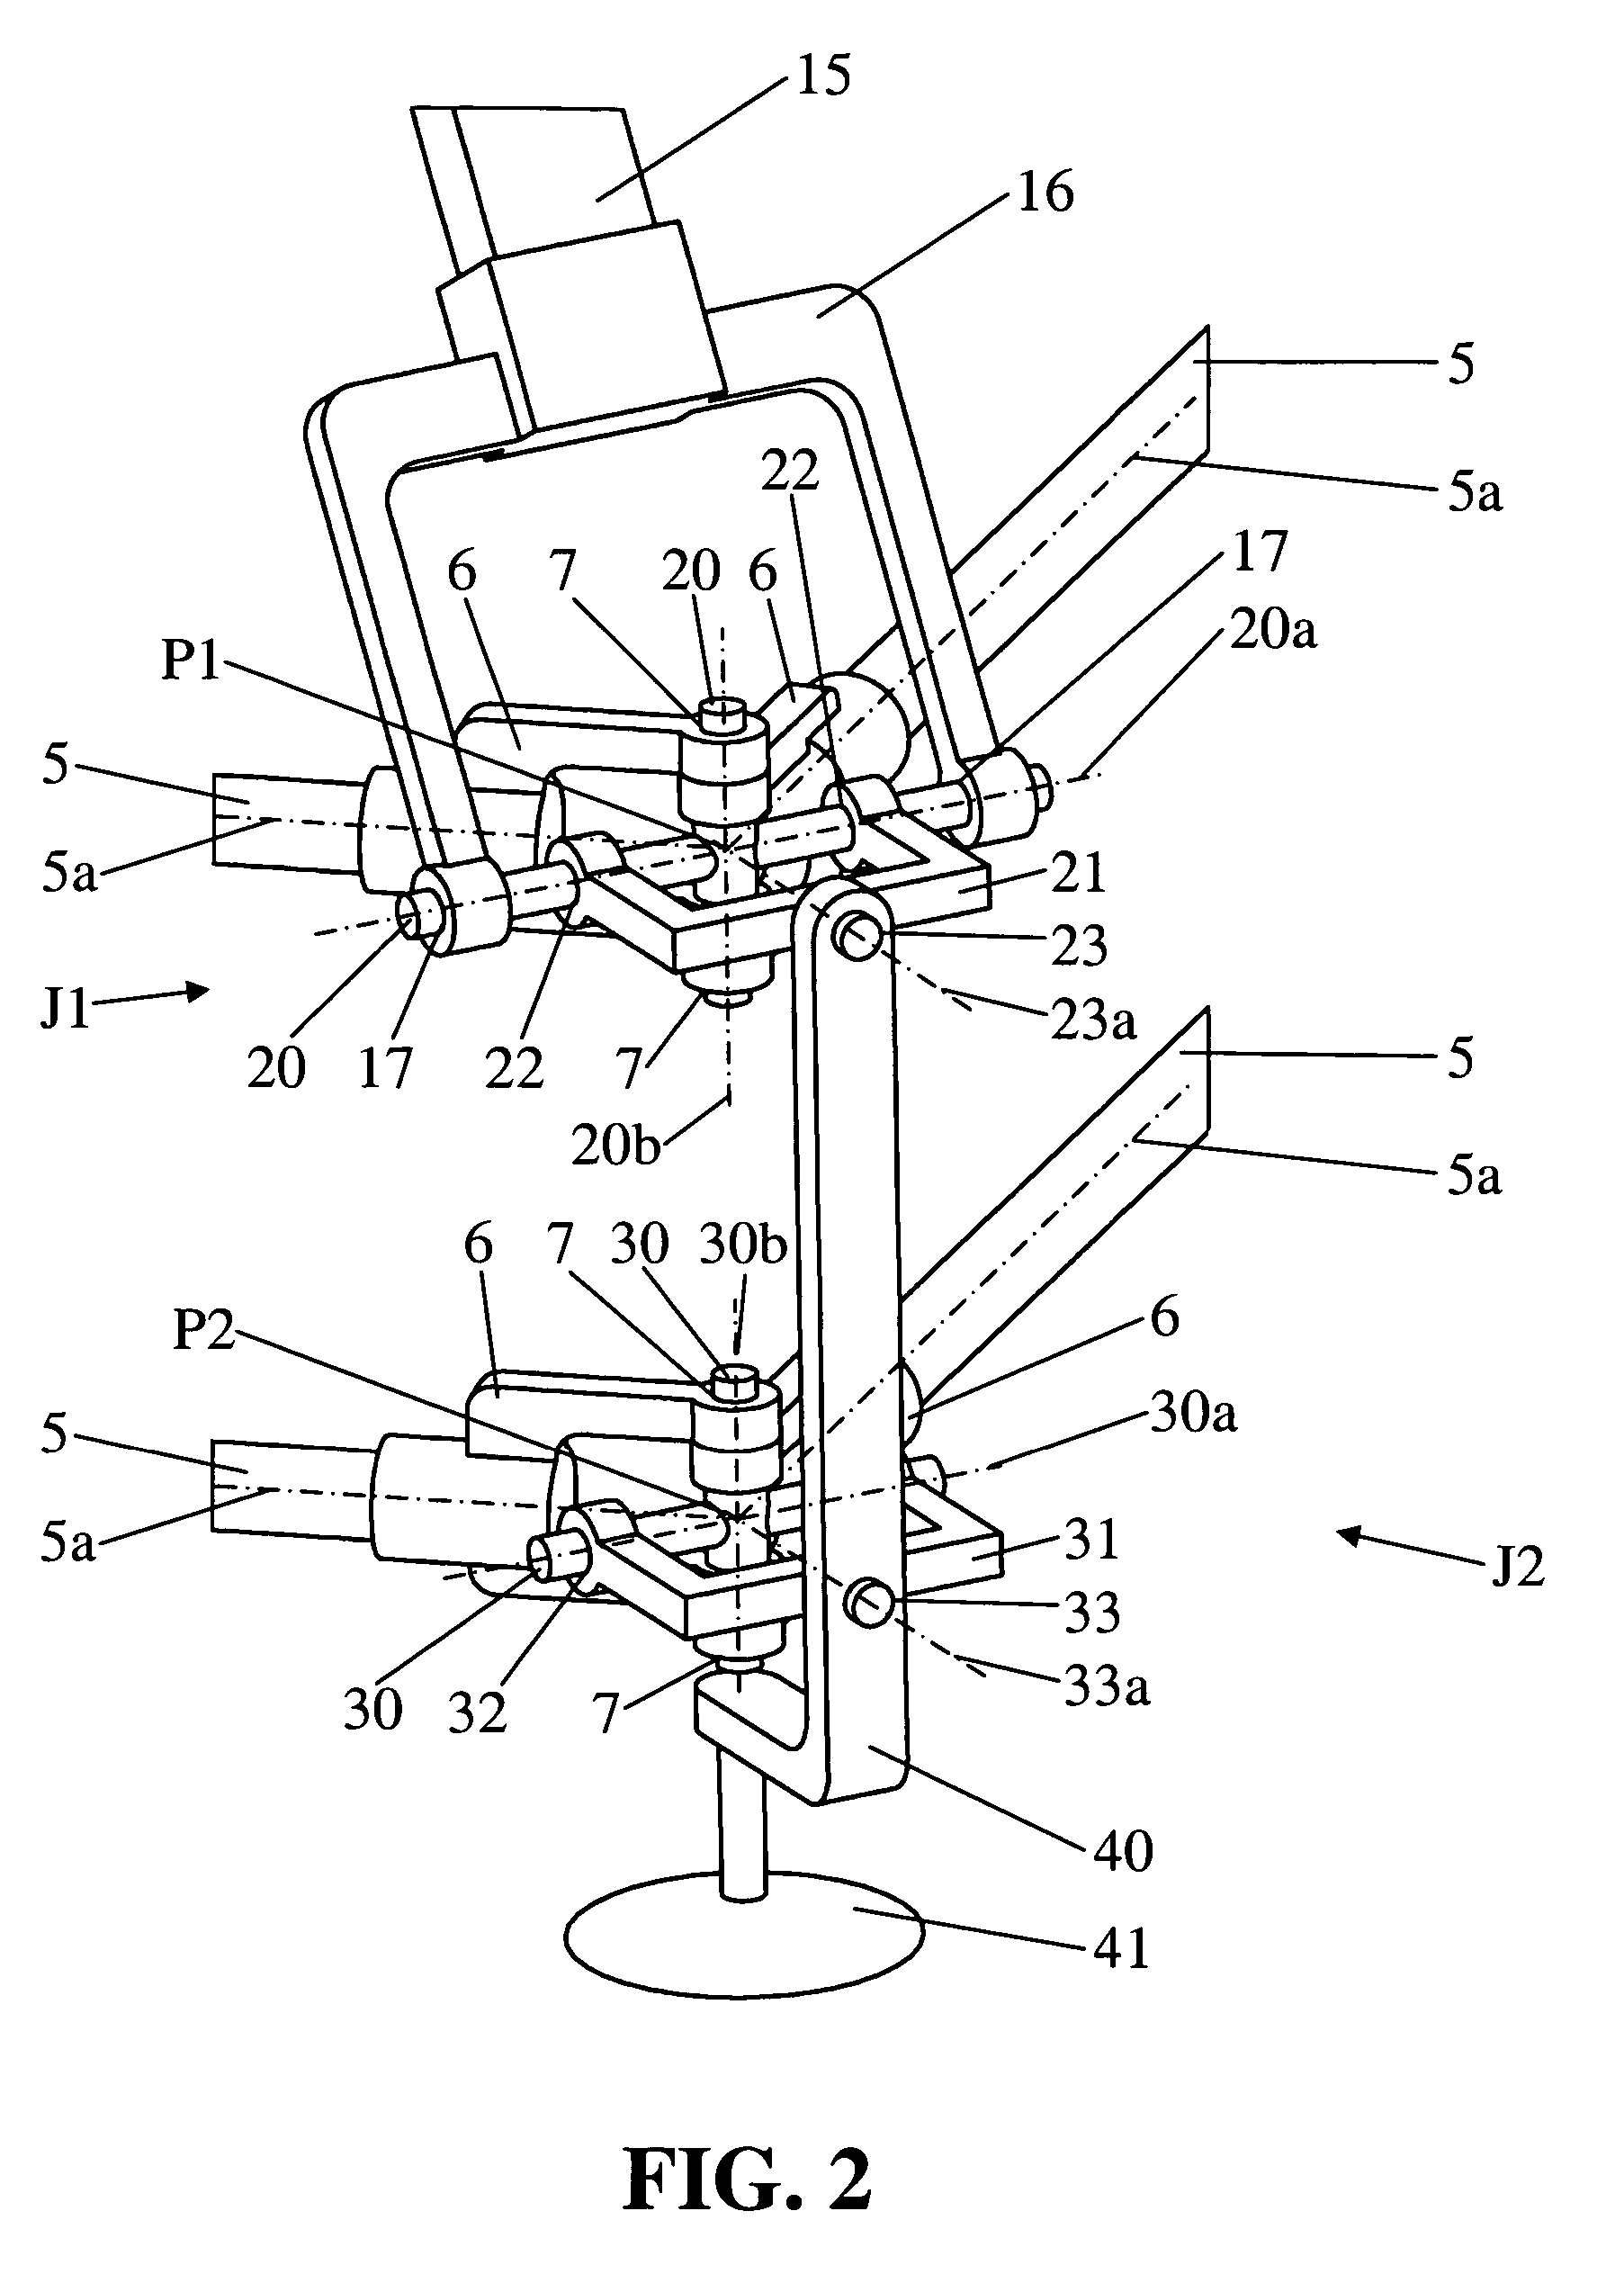 Parallel kinematics mechanism with a concentric spherical joint